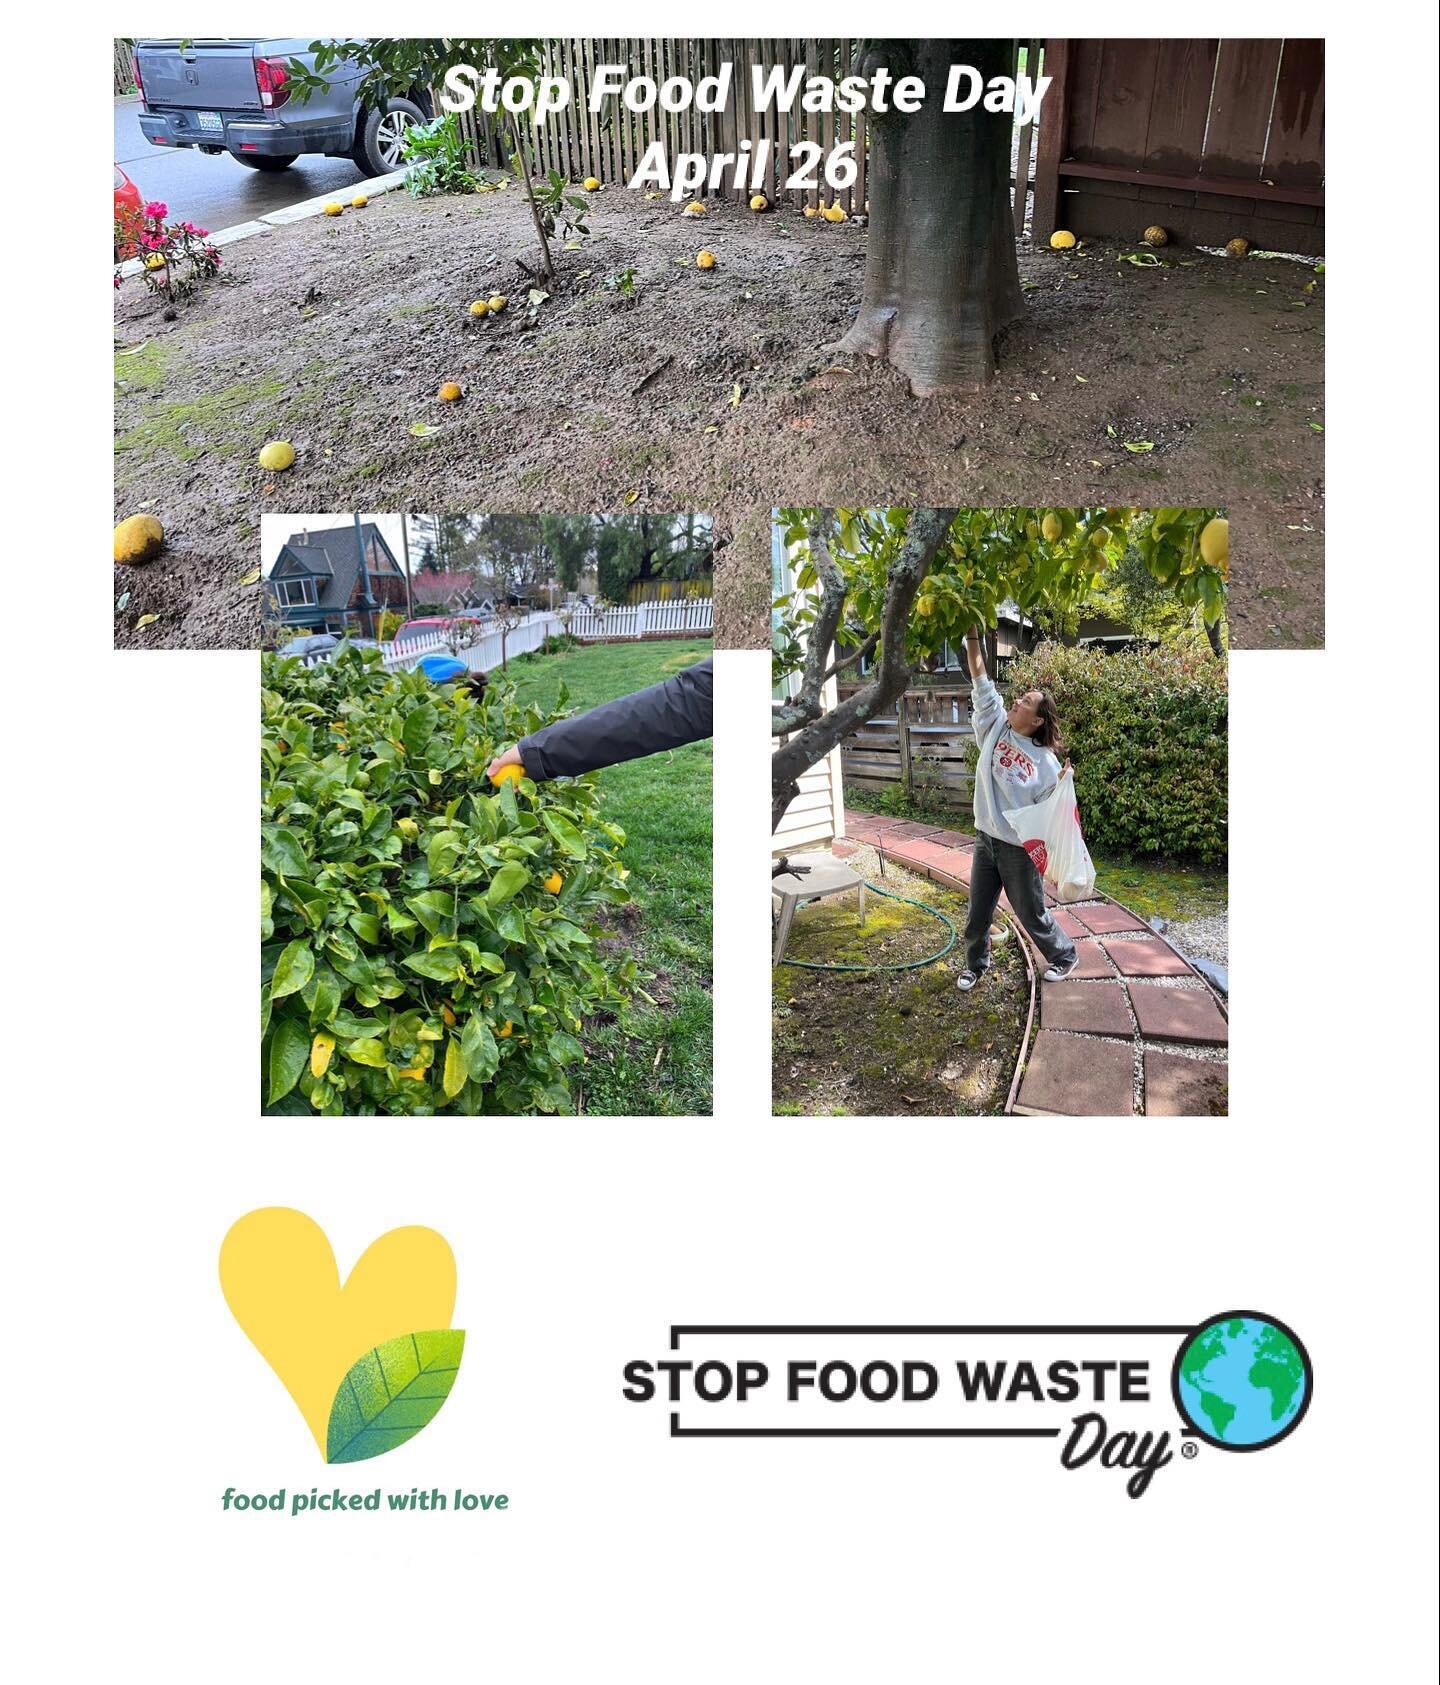 April 26th is Stop Food Waste Day. One Food Picked with Love chapter has donated over 4,000 pounds of fresh fruit, that otherwise would have mostly gone to waste. Join Food Picked with Love and help decrease food waste in your community. Link in BIO.